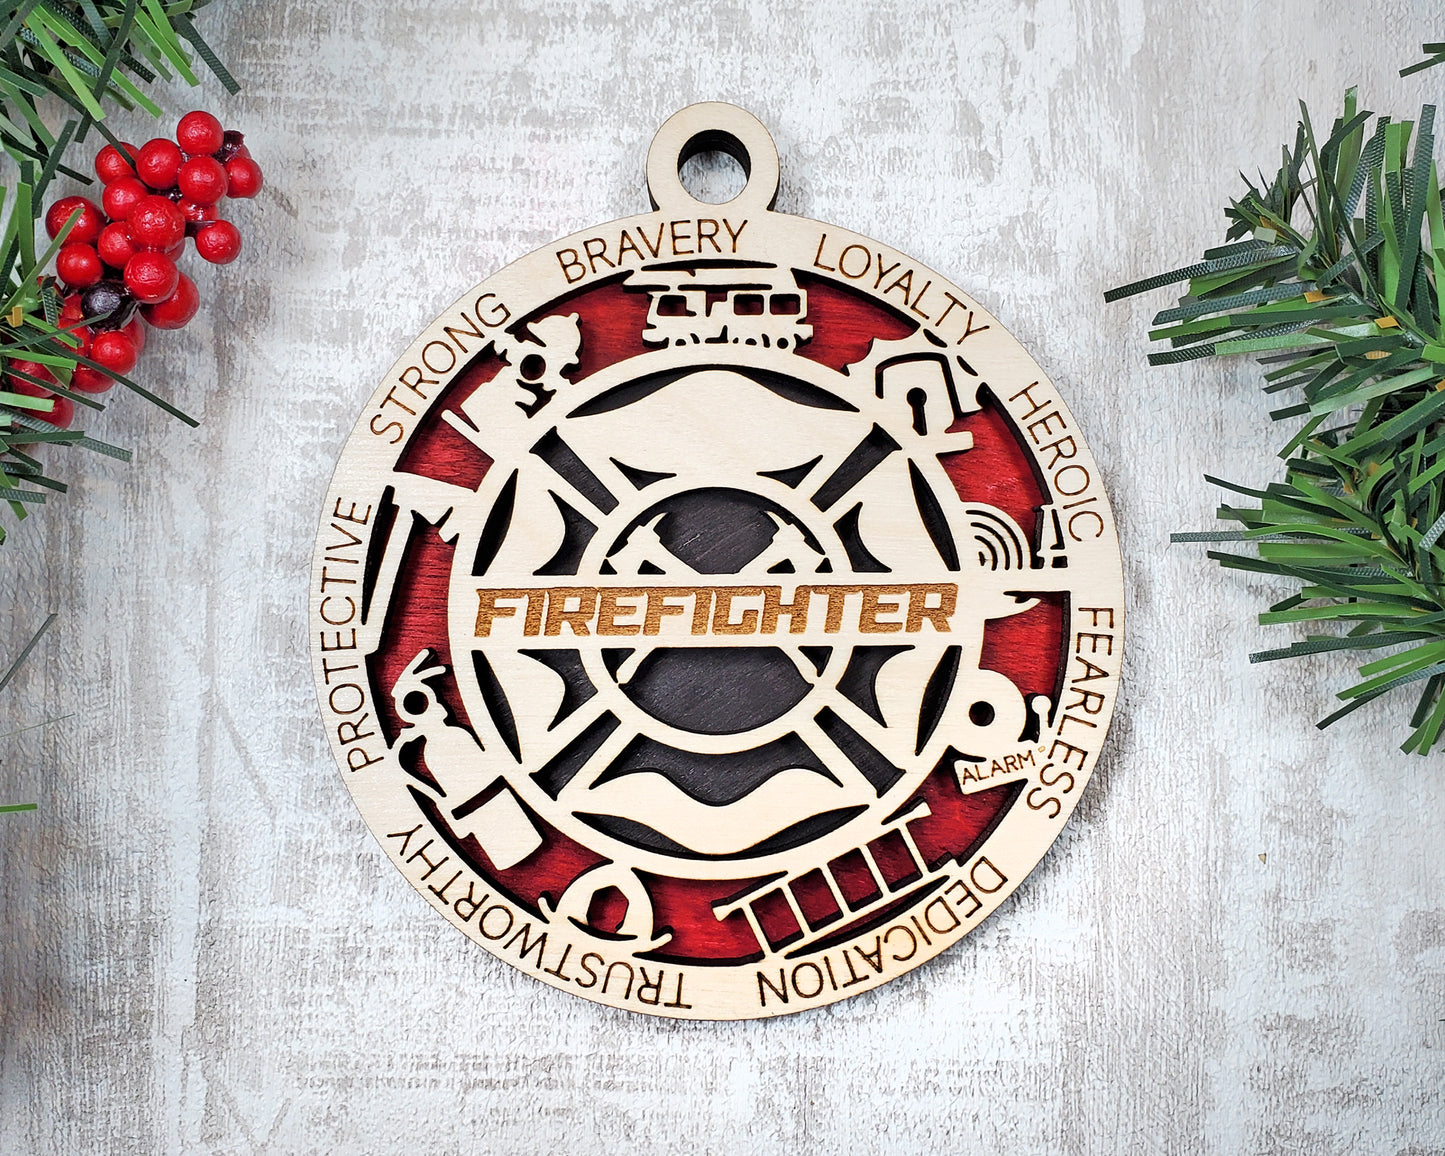 Firefigher First Responders Christmas Ornament Double Layer / Personalized Ornament